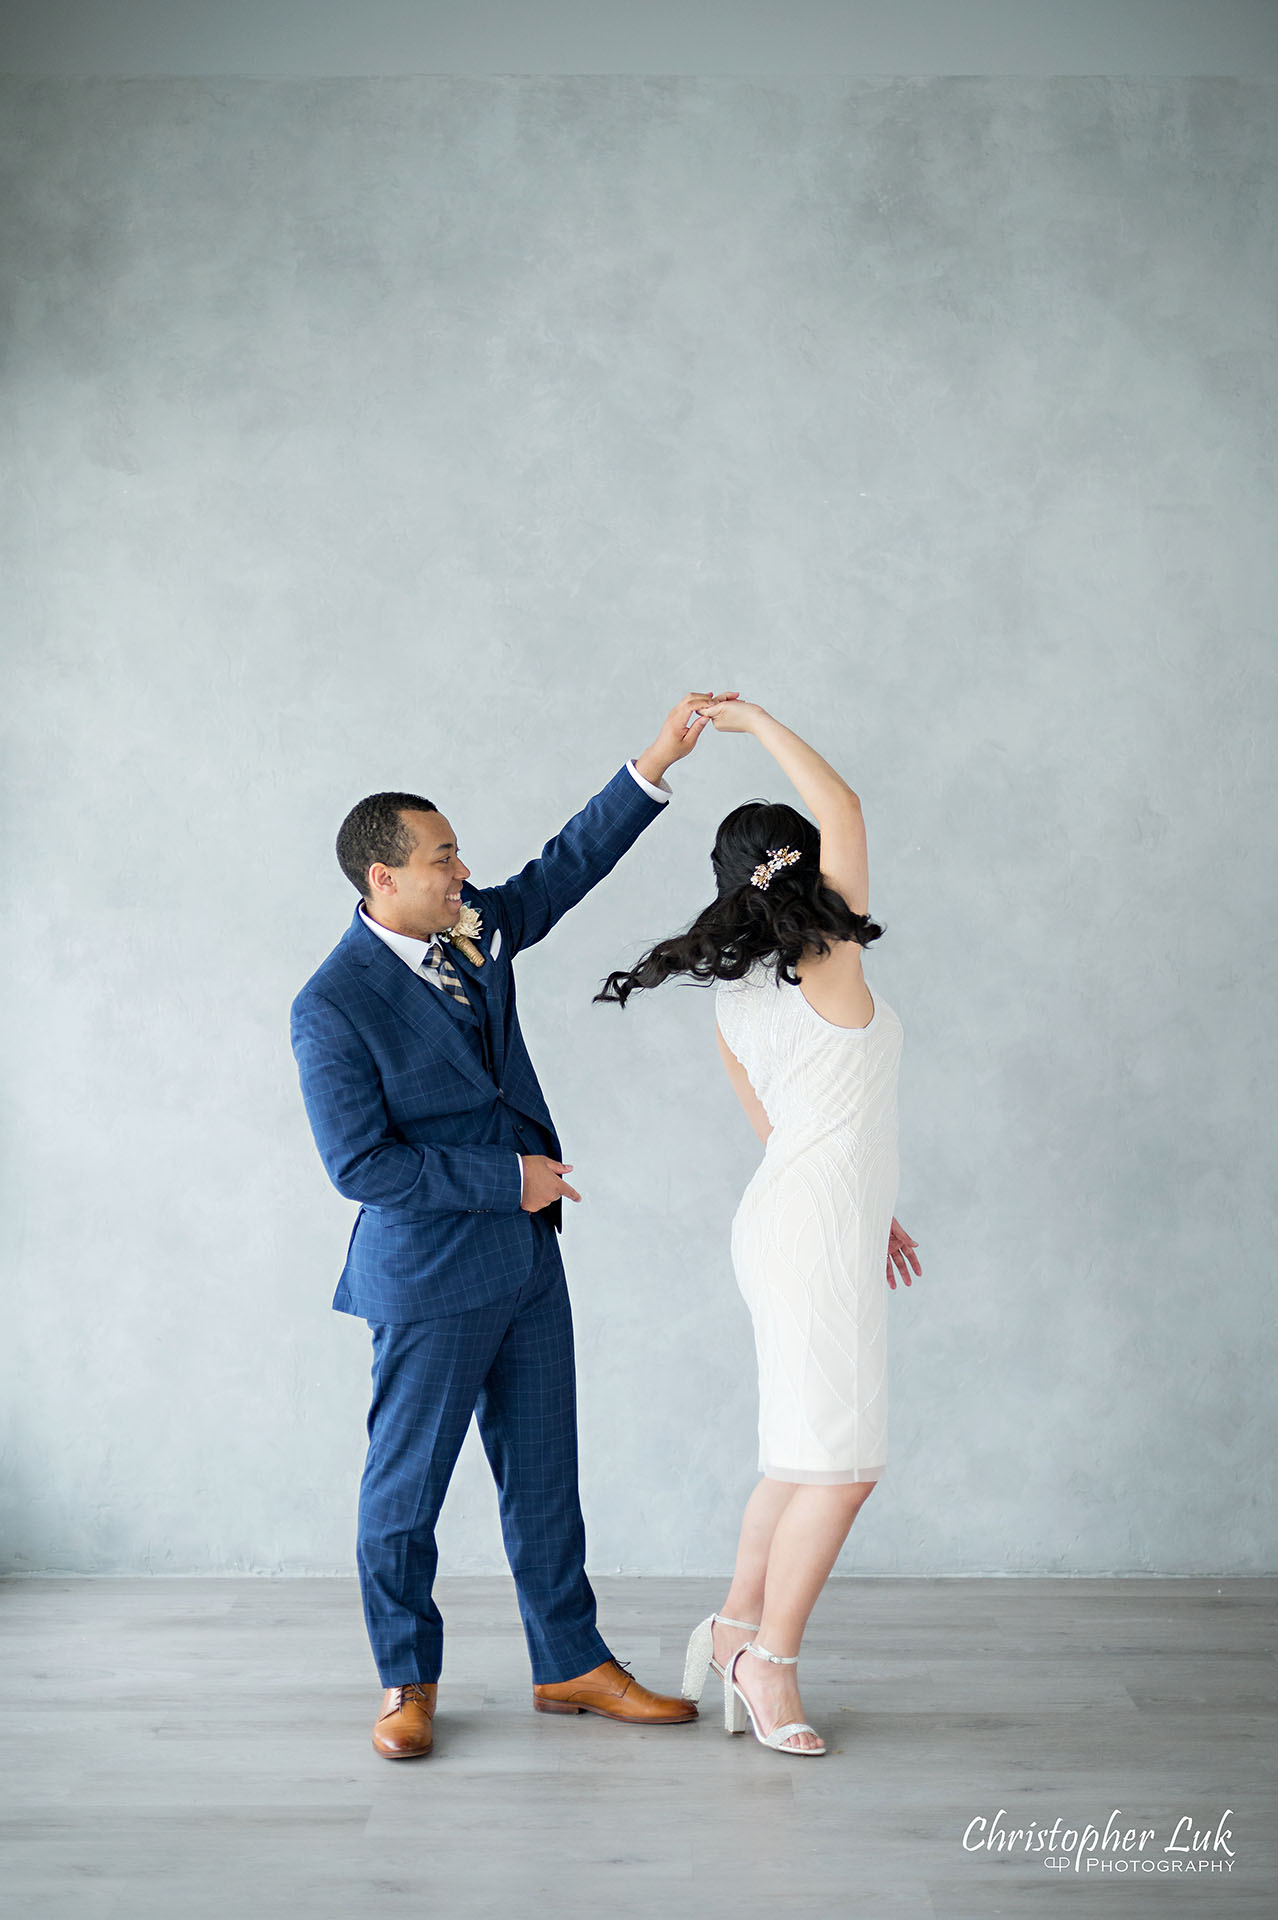 Christopher Luk Markham Wedding Photographer Linen and Love Studio Anniversary Session Bride Groom Portrait Natural Candid Organic Photojournalistic Dancing Spinning Twirling